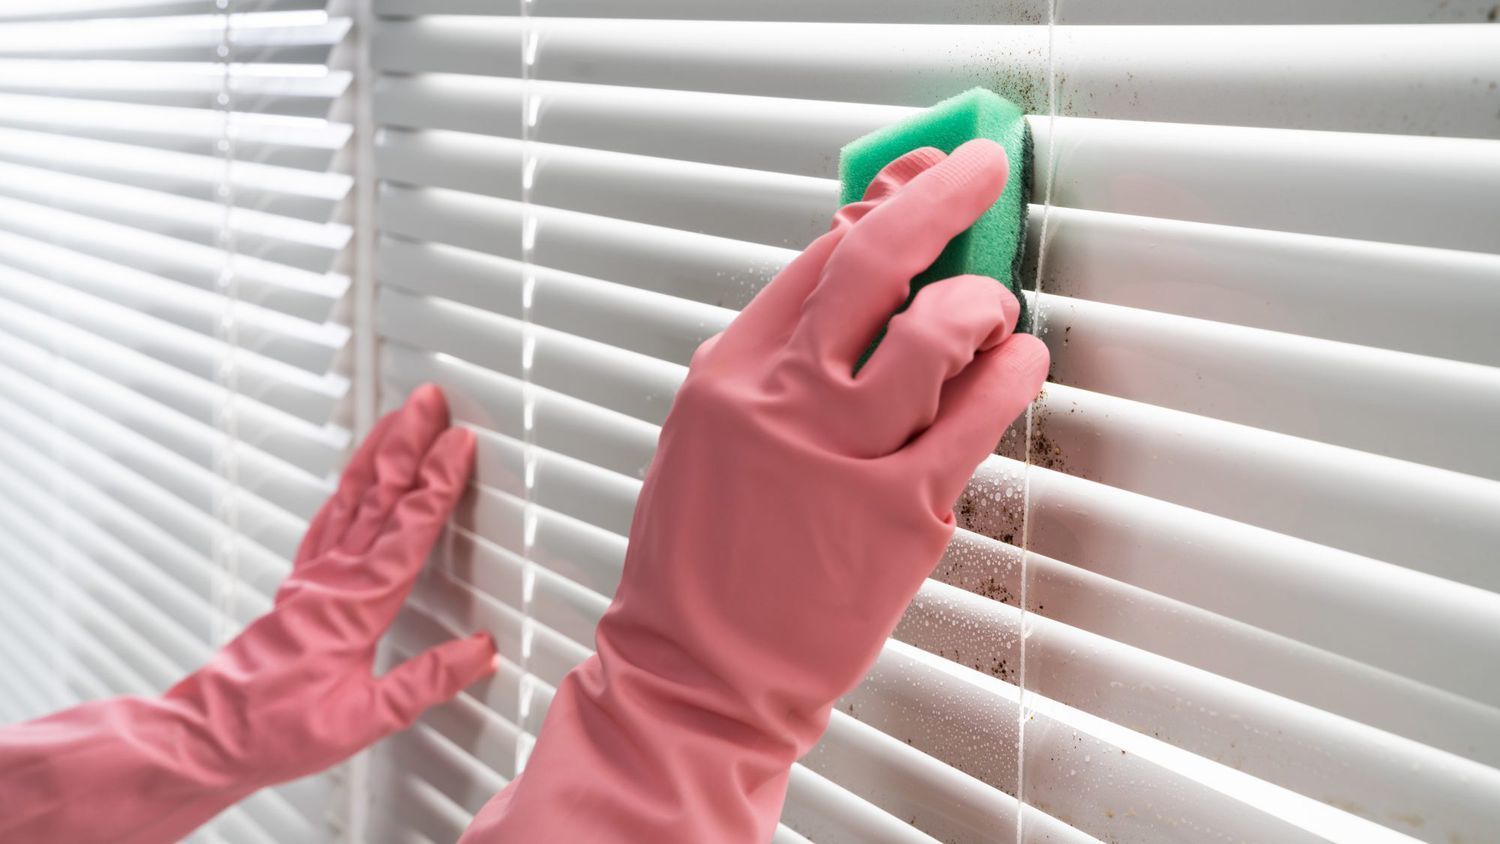 Maintaining Your Blinds and Shades